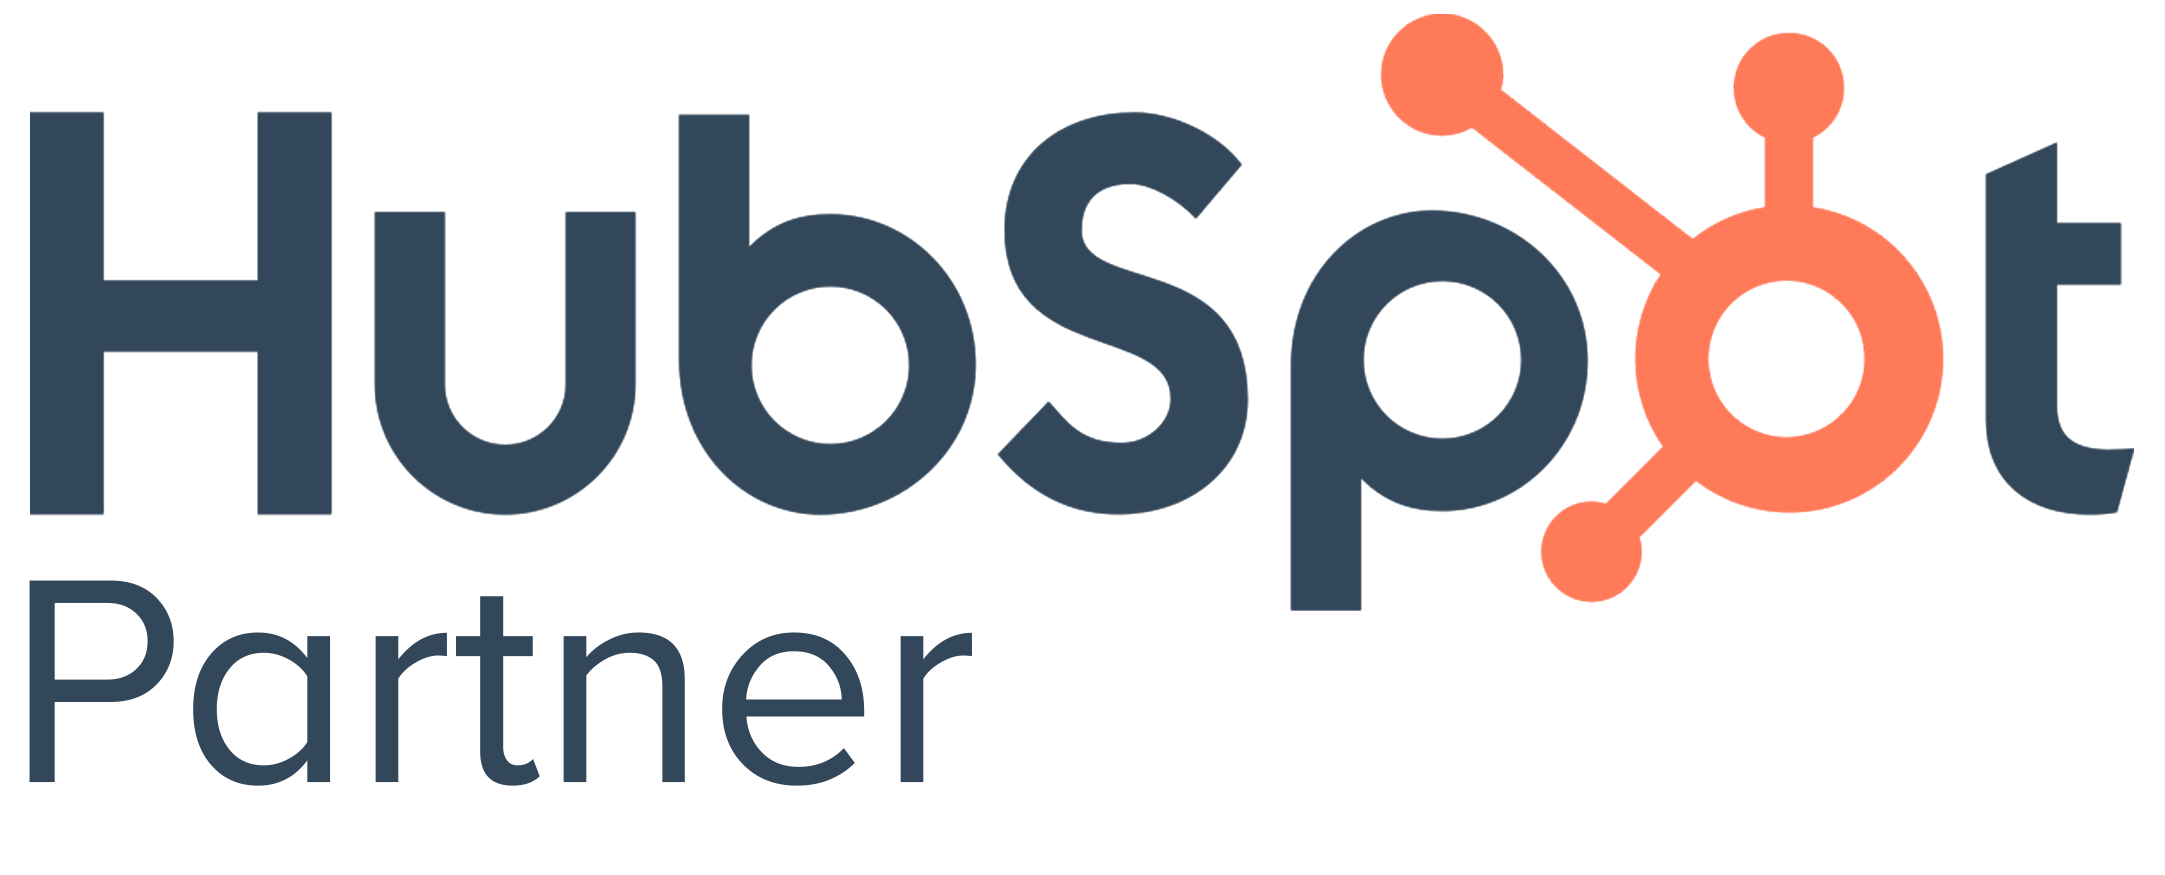 HubSpot Partner with hover